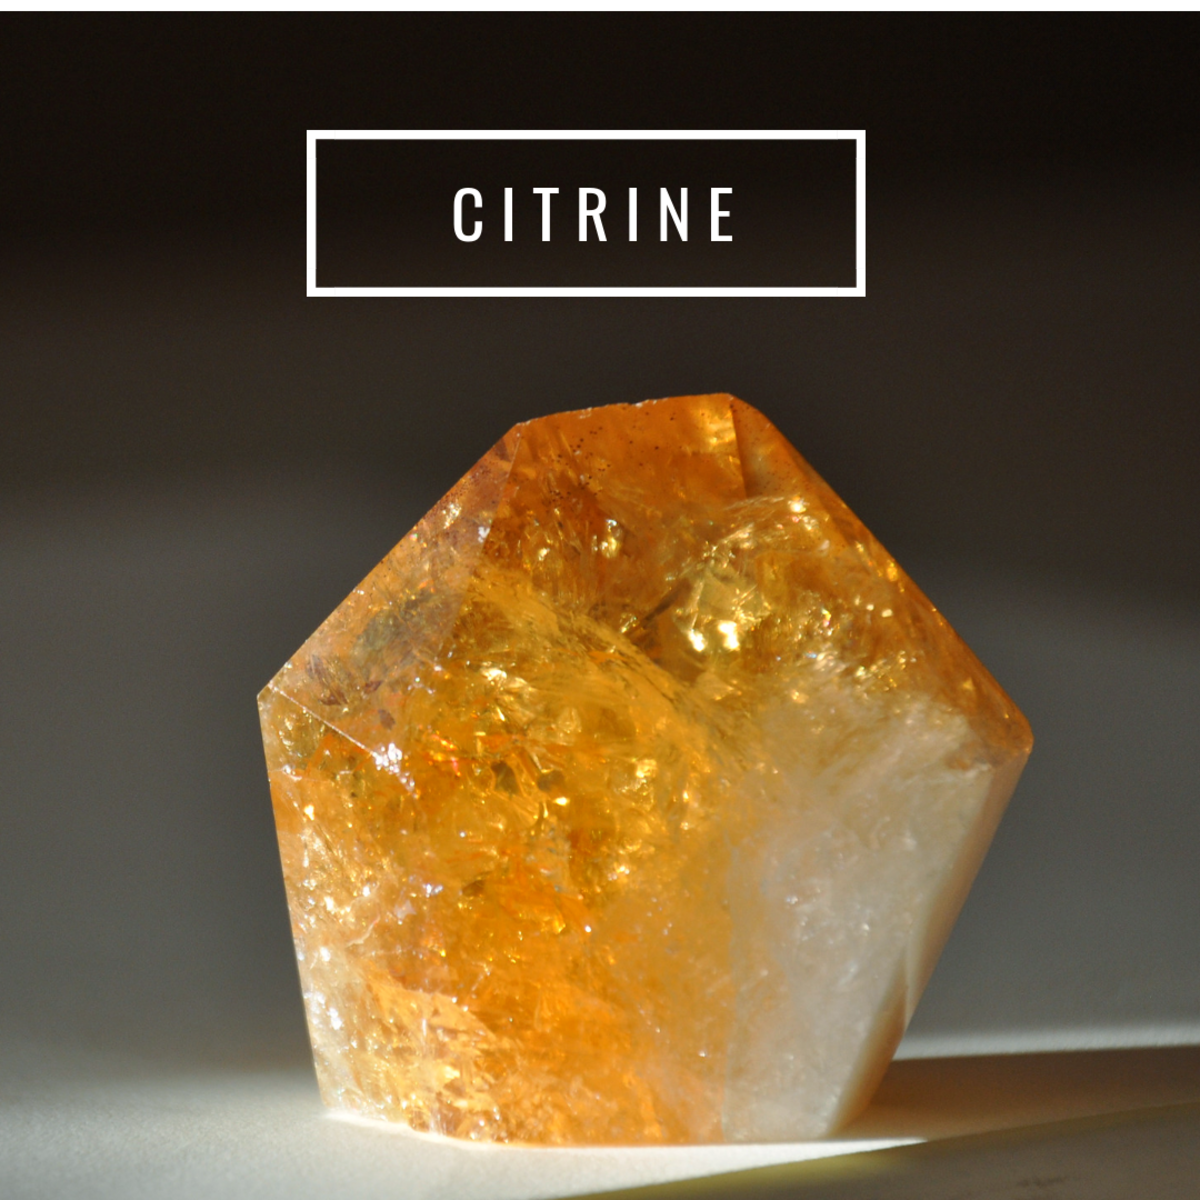 Citrine is great for lessening symptoms of depression.